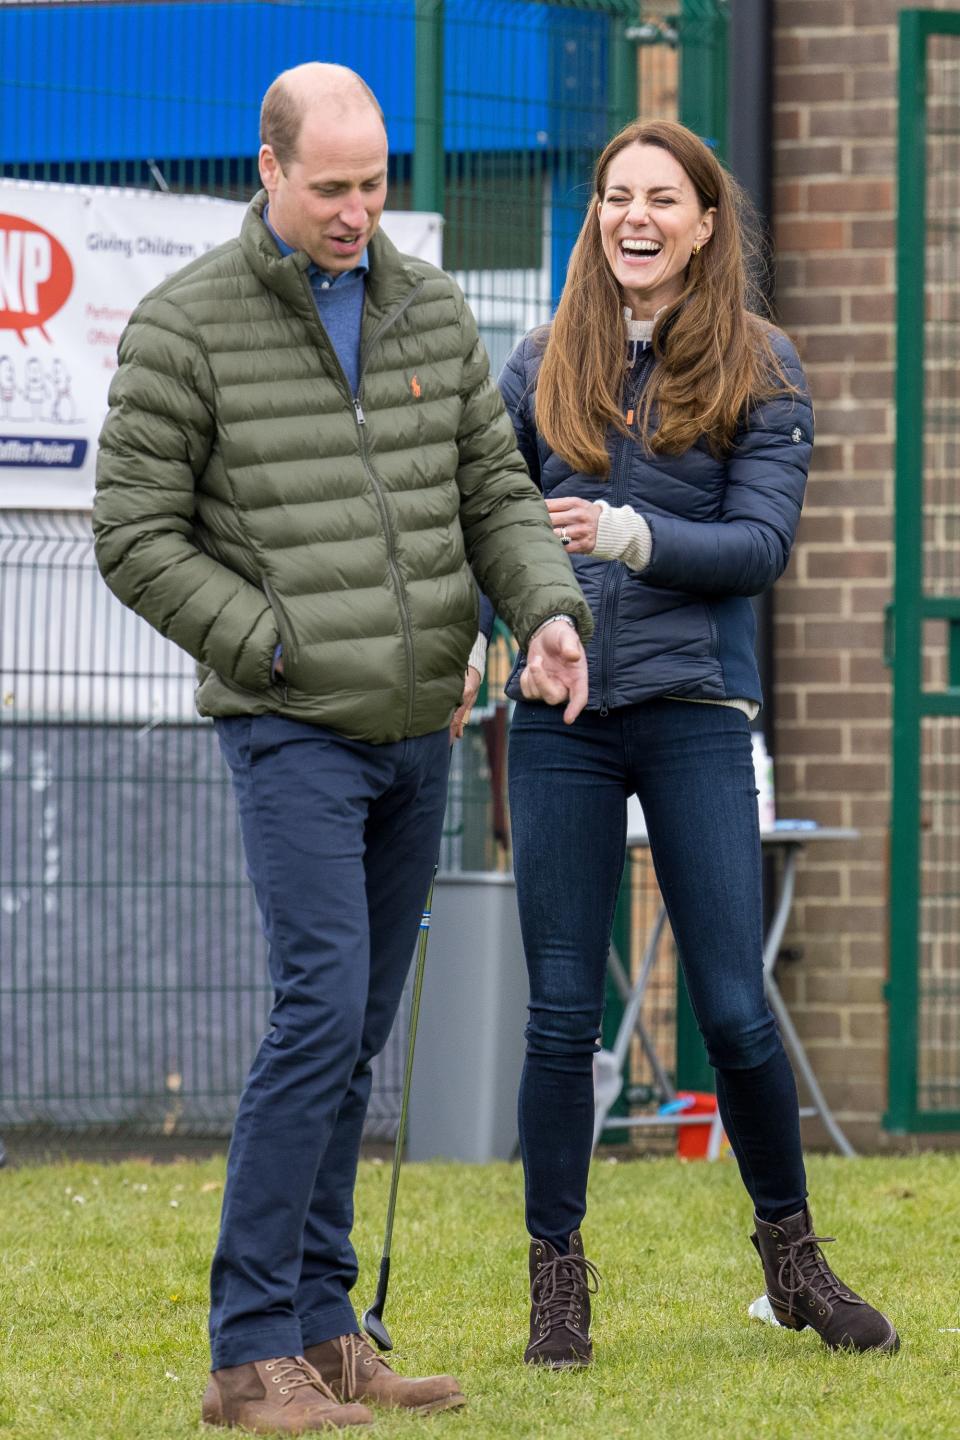 William and Kate visit Durham on 27 April 2021Getty Images